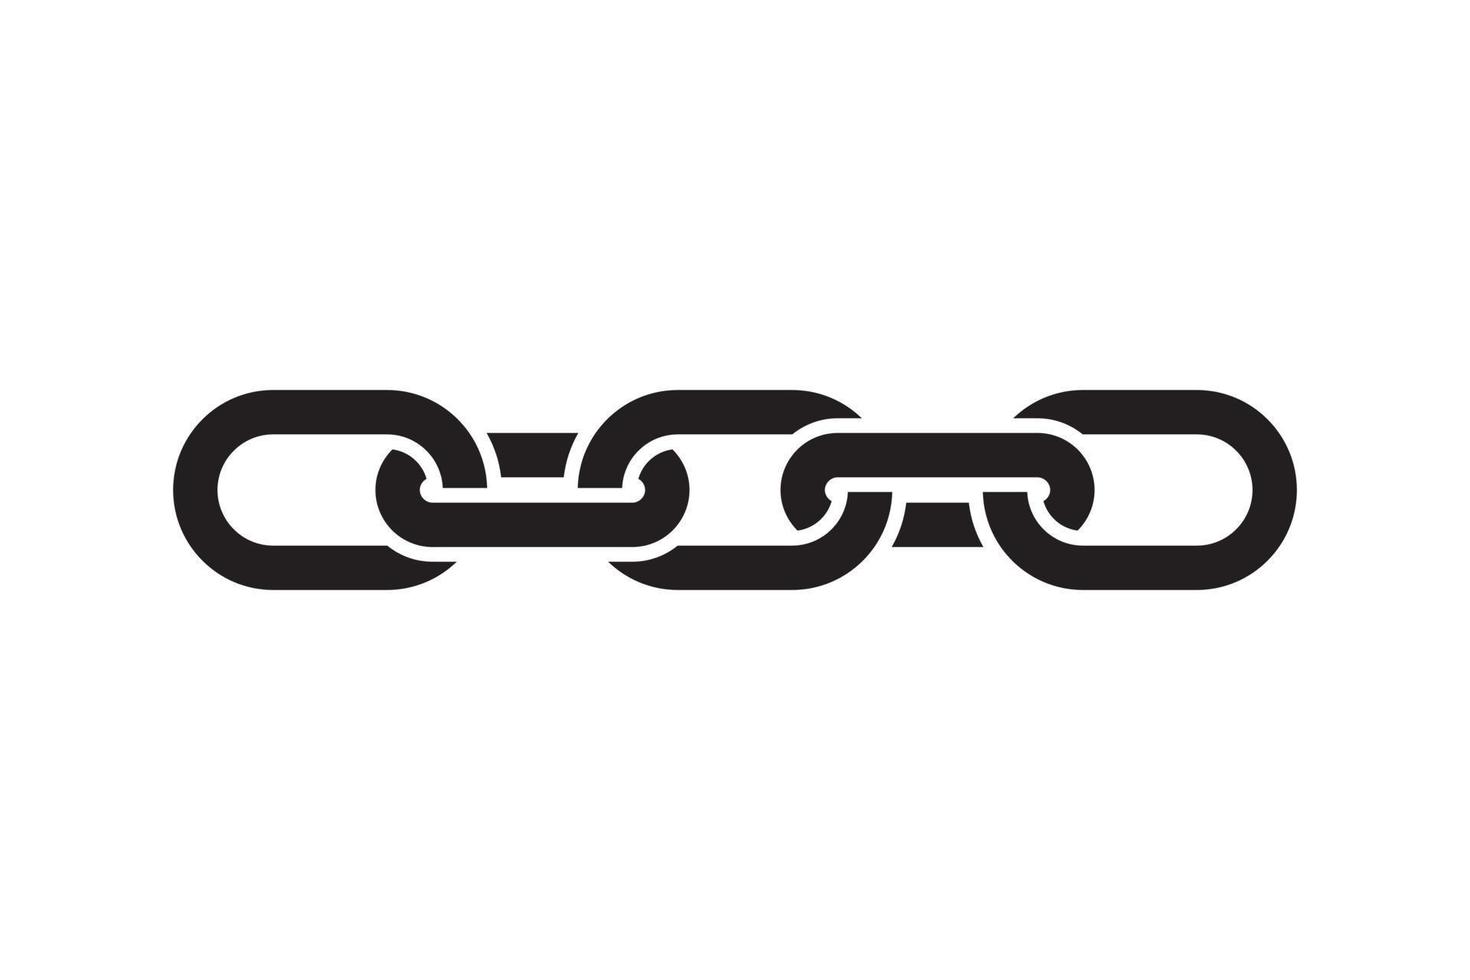 Chain link icon. Connection sign vector illustration. Linked interface design.